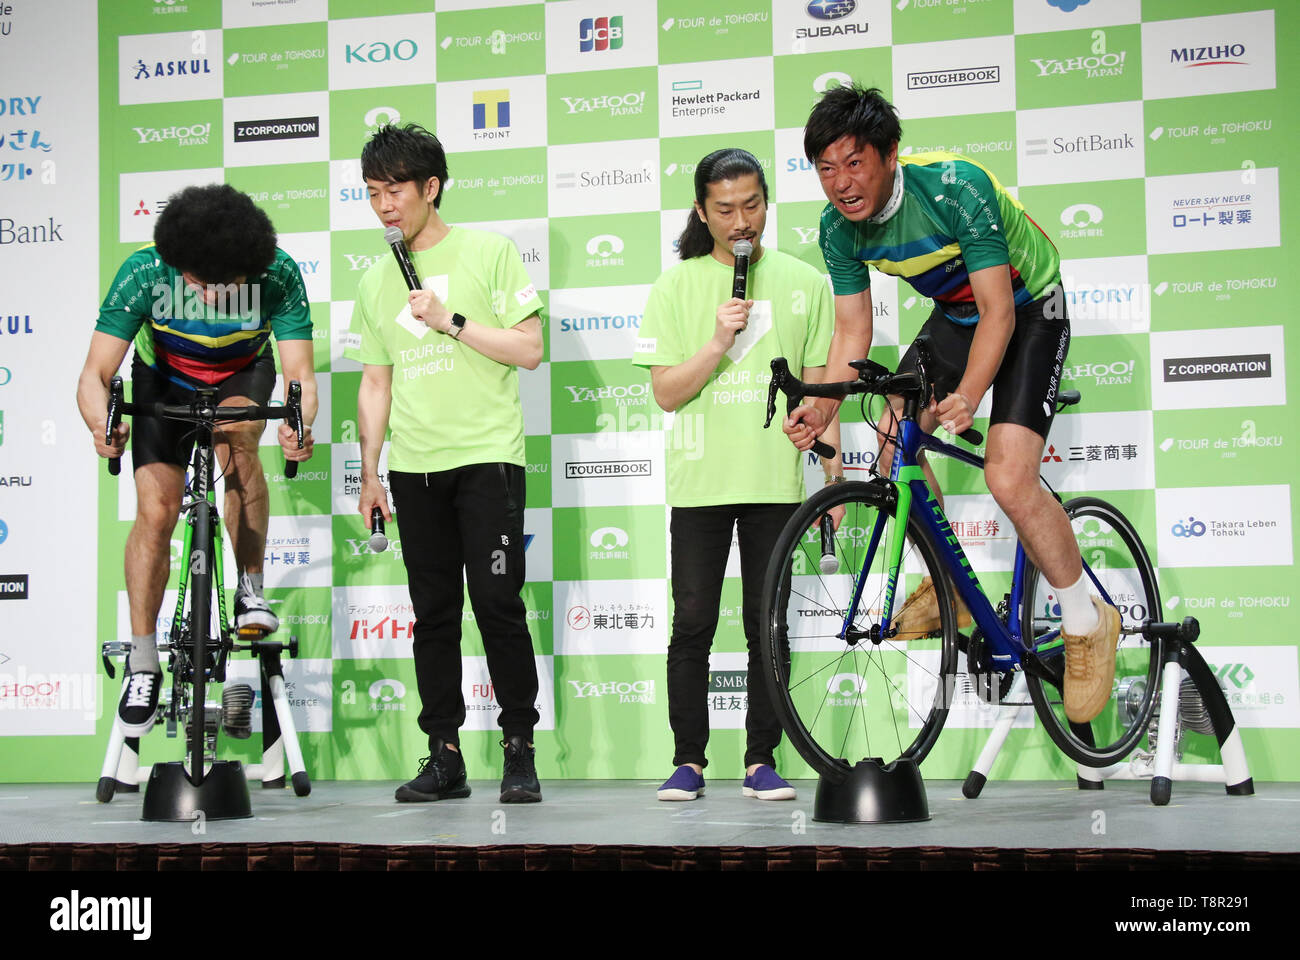 Tokyo, Japan. 14th May, 2019. Japanese comedy duo Total Ten Bosch member Kensuke Fujita (L) and comedy trip Panther member Takahiro Ogata (R) fight on bicycles as they attend a promotional event of the Tour de Tohoku 2019 fun ride in Tokyo on Tuesday, May 14, 2019. Tour de Tohoku is is an annual cycling event to support Tohoku region, northern Japan as a massive earthquake and tsunami attacked the region in 2011. Credit: Yoshio Tsunoda/AFLO/Alamy Live News Stock Photo